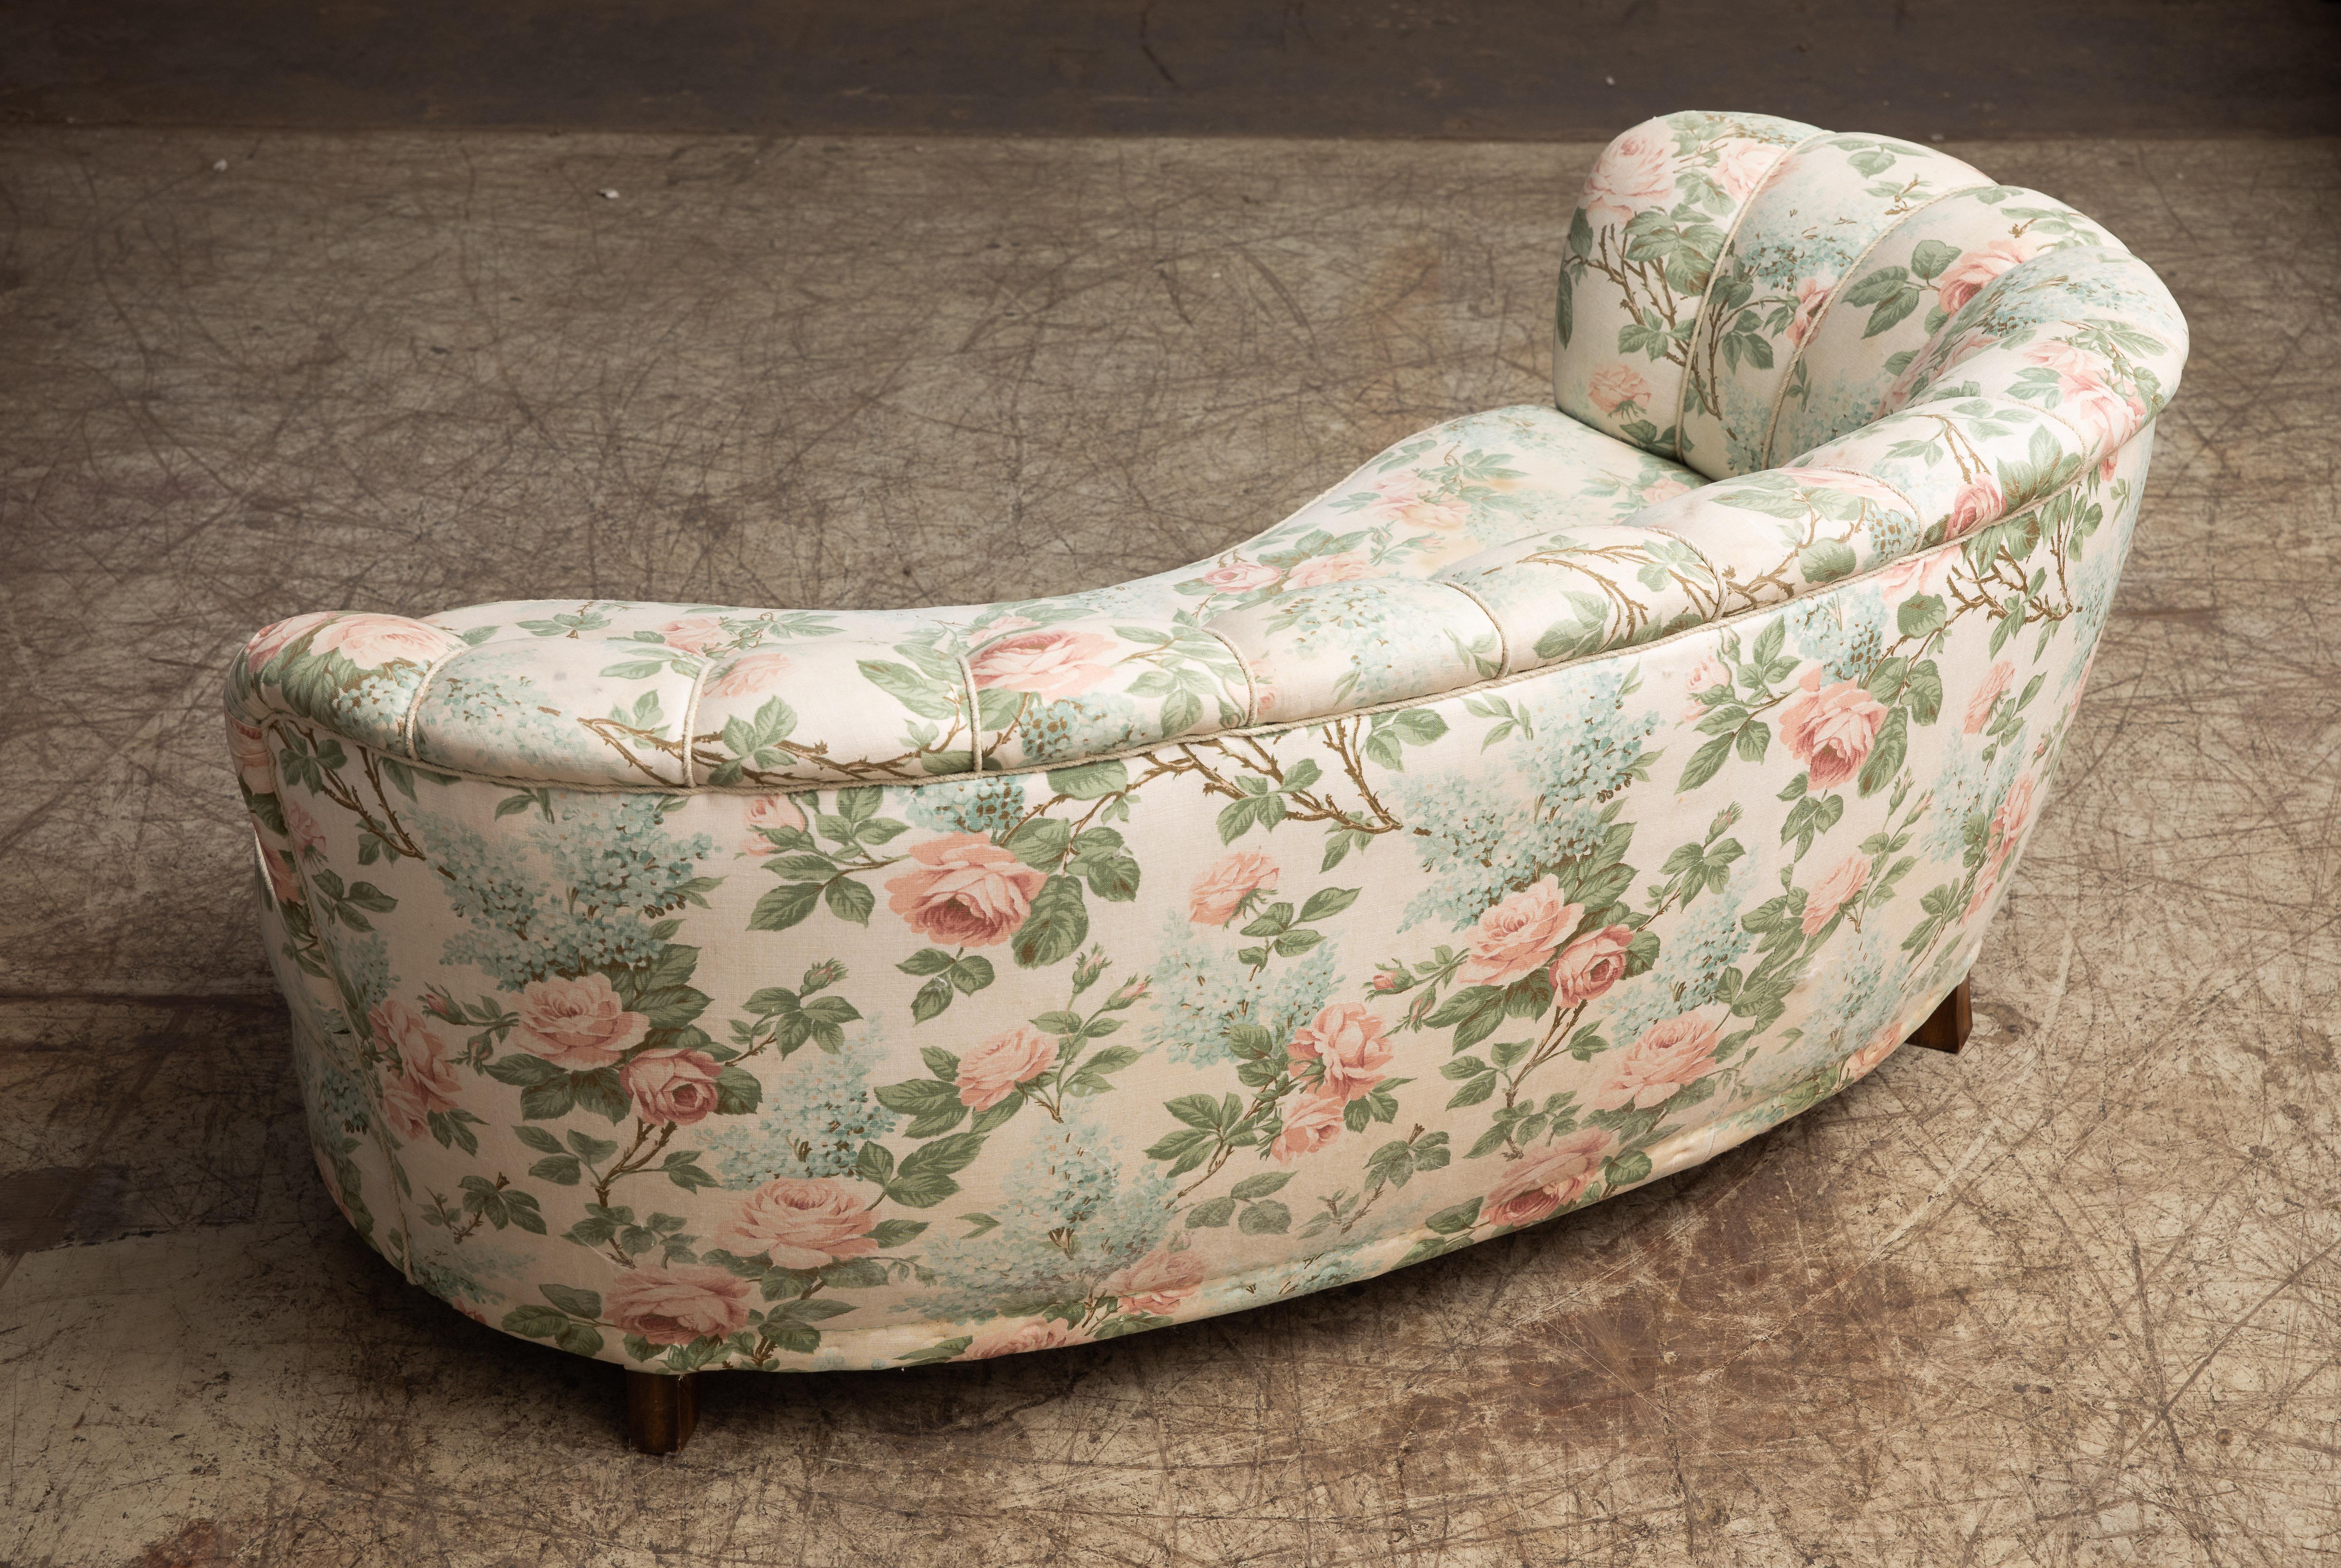 Mid-20th Century Danish 1940s Curved Banana Shape Loveseat and Chaise Lounge in Floral Fabric